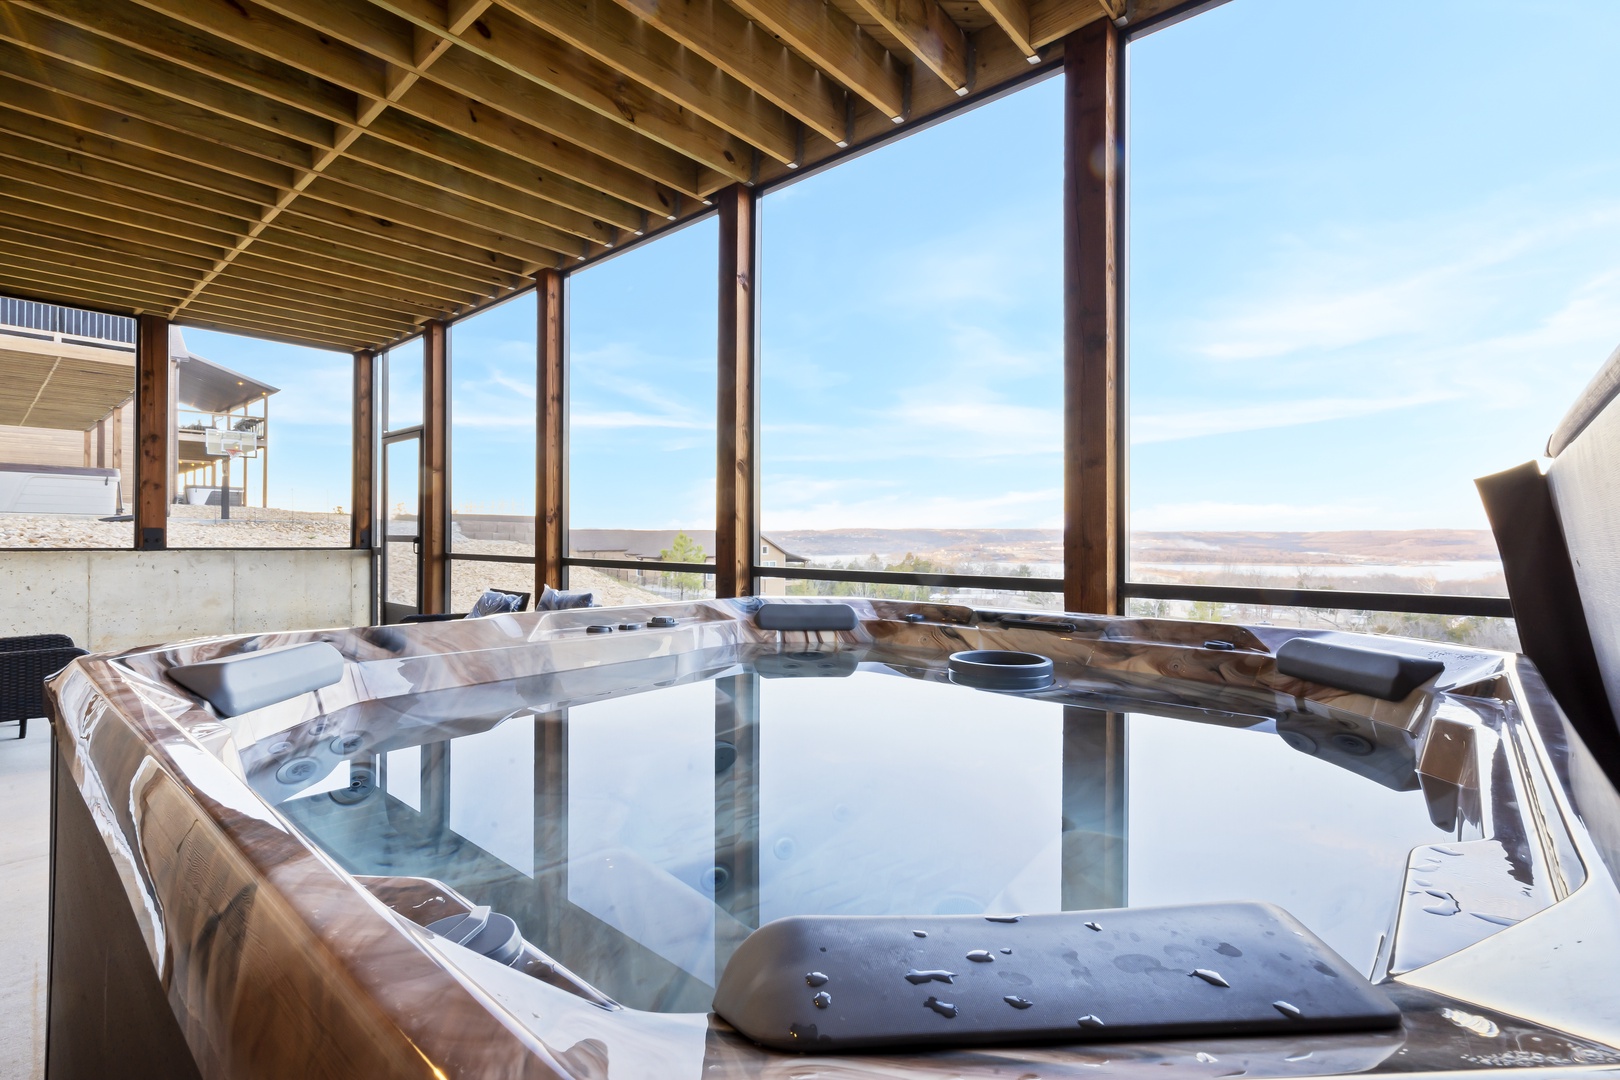 Relax in the private hot tub with spectacular views